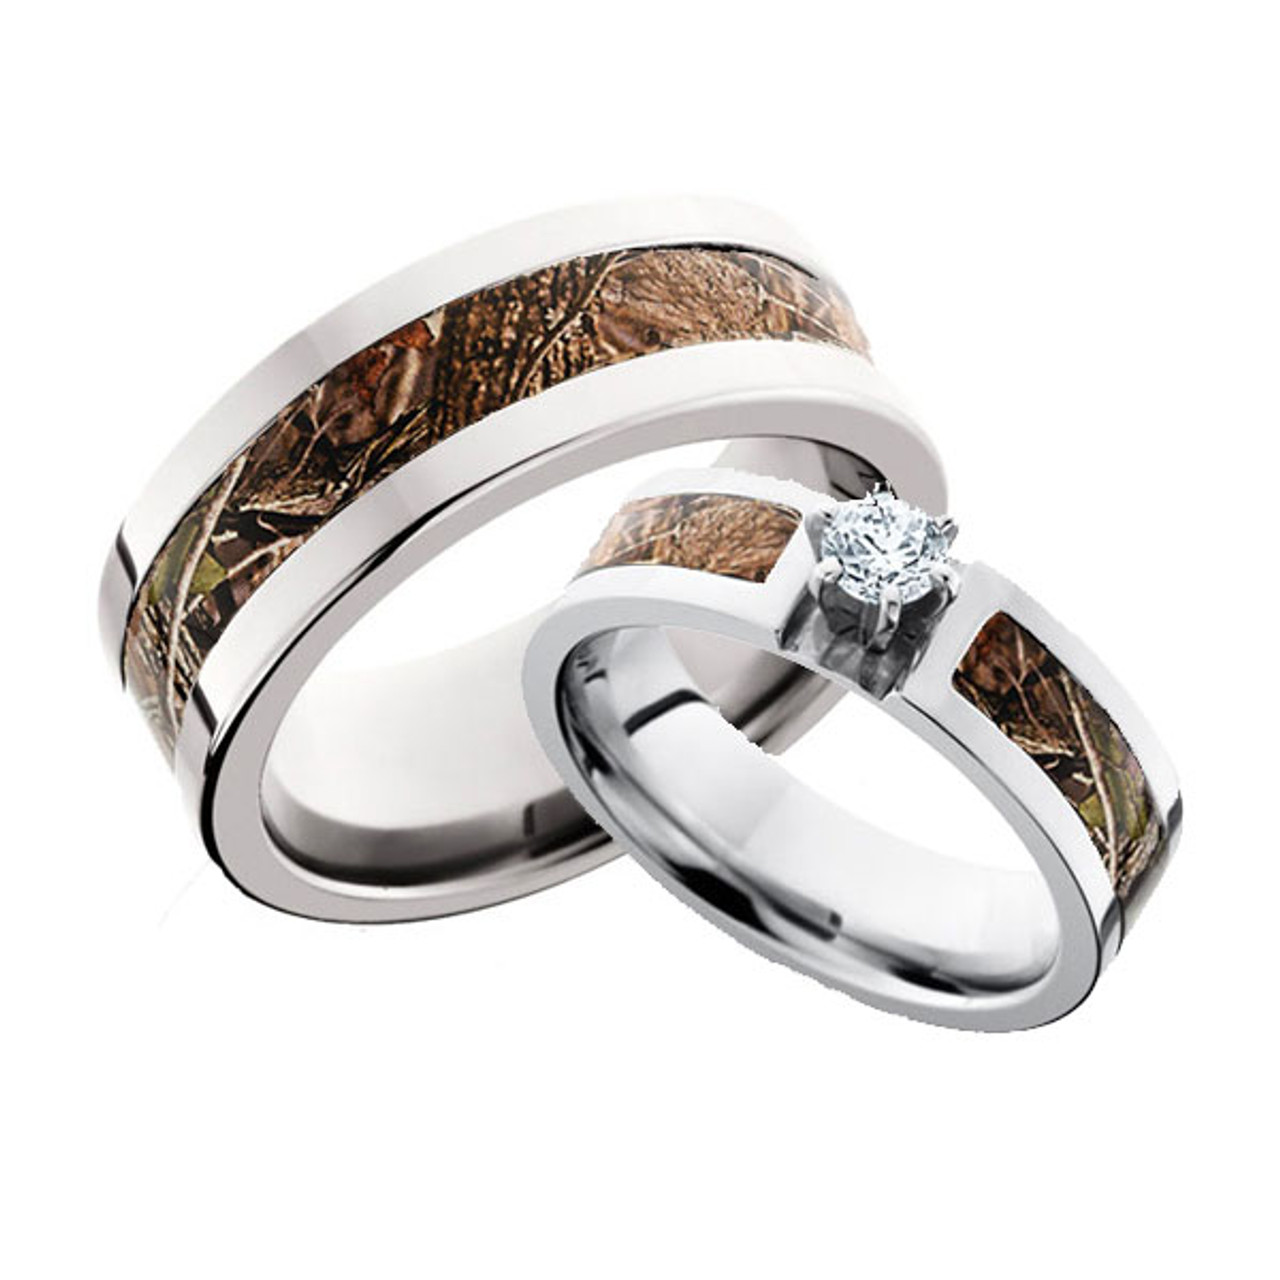 Silicone Wedding Rings: Why Every Outdoorsman Should Have One | Mossy Oak